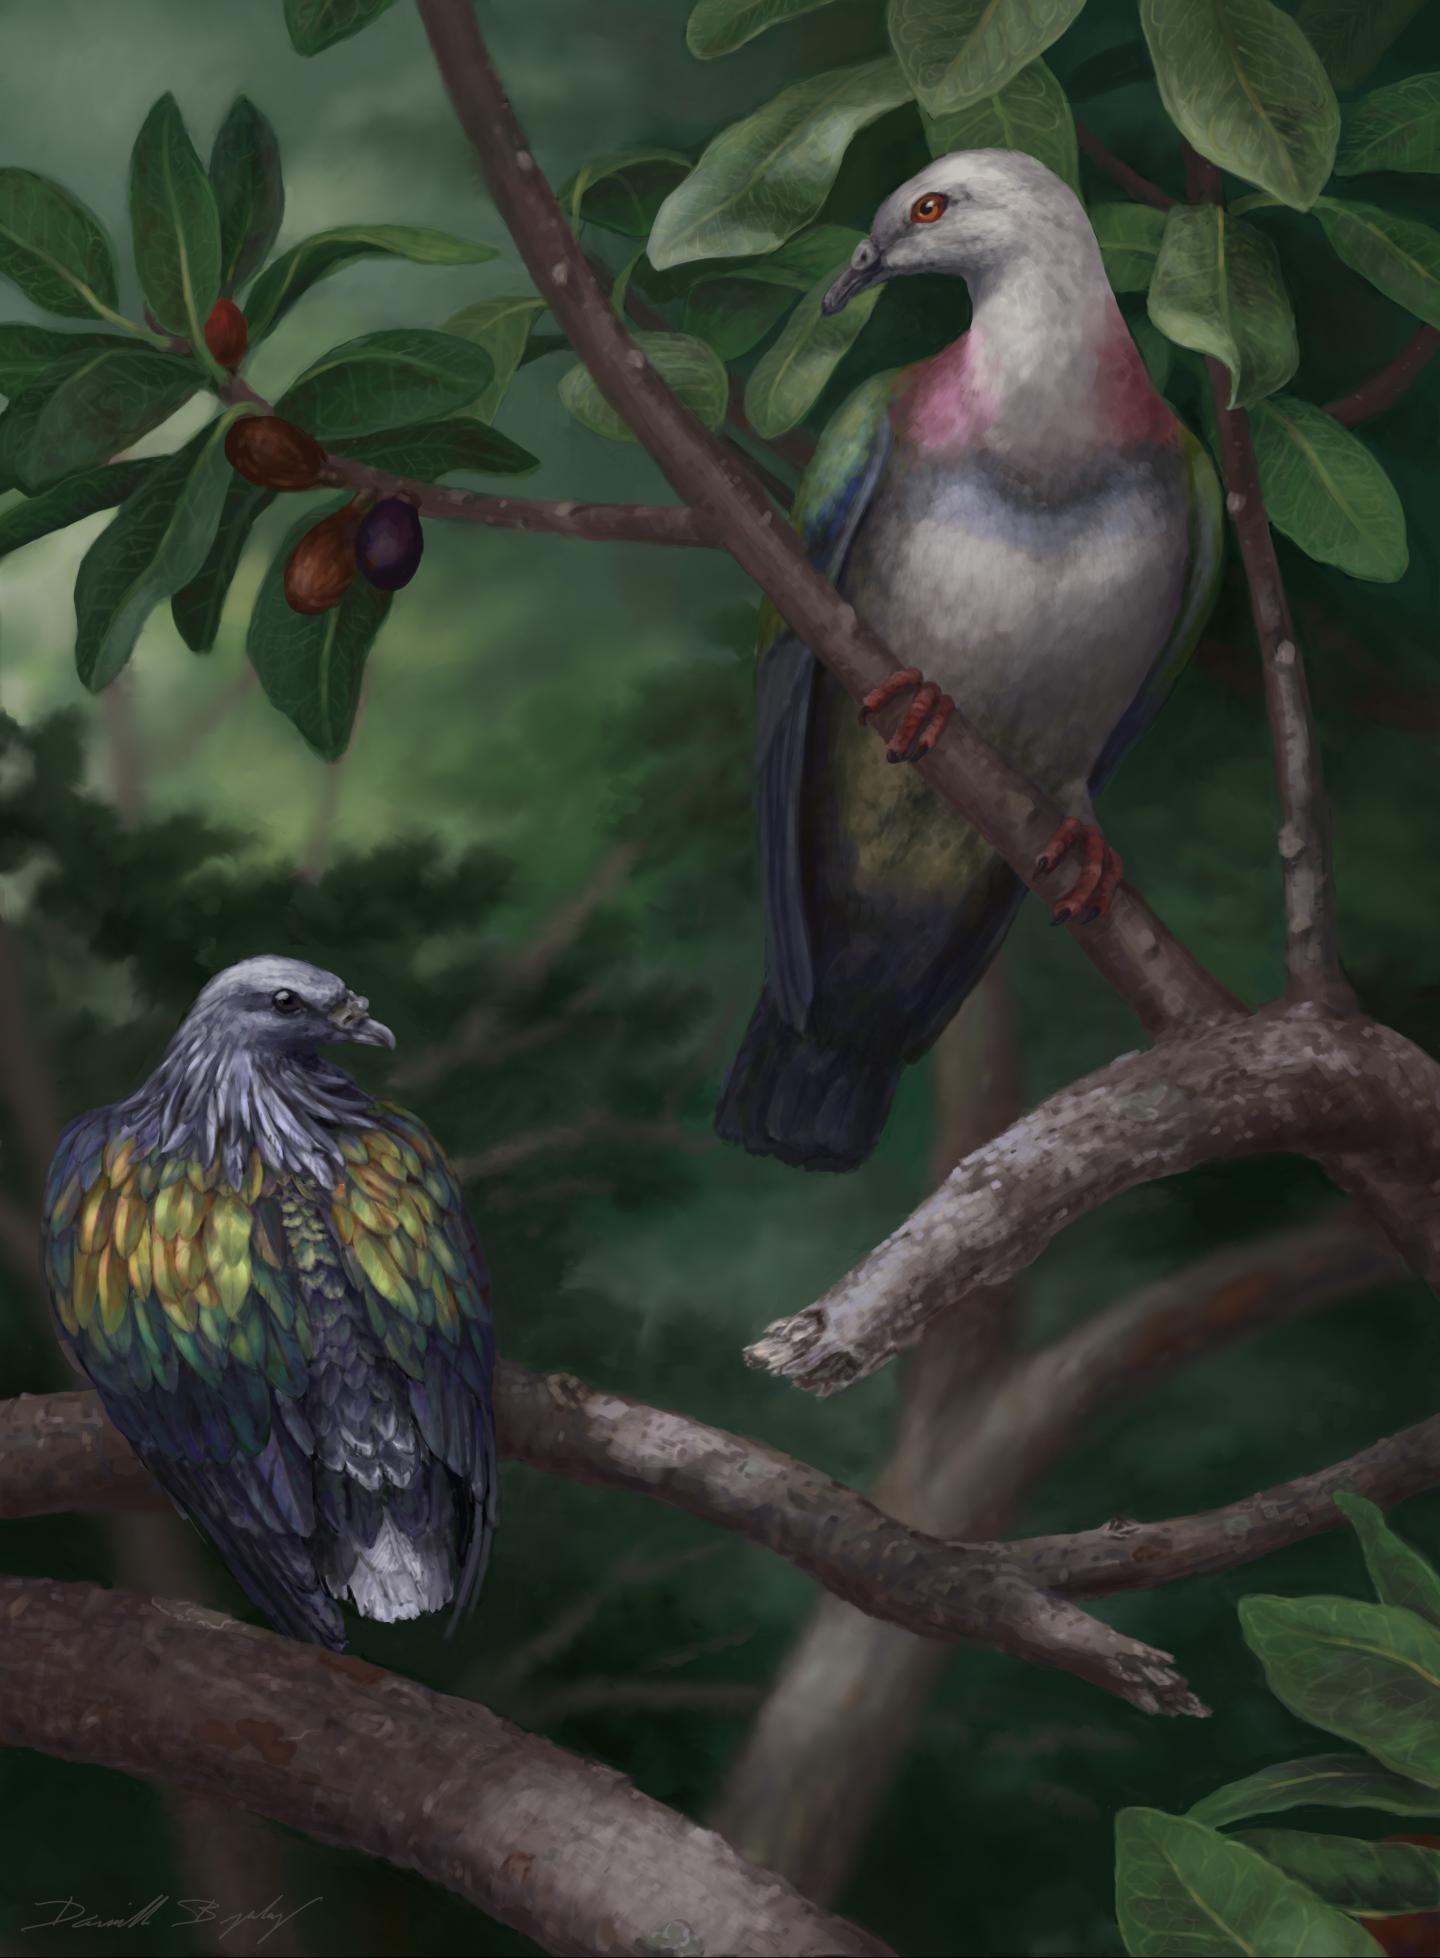 Giant Extinct Pigeon Could Swallow Tennis Ball-Sized Fruit